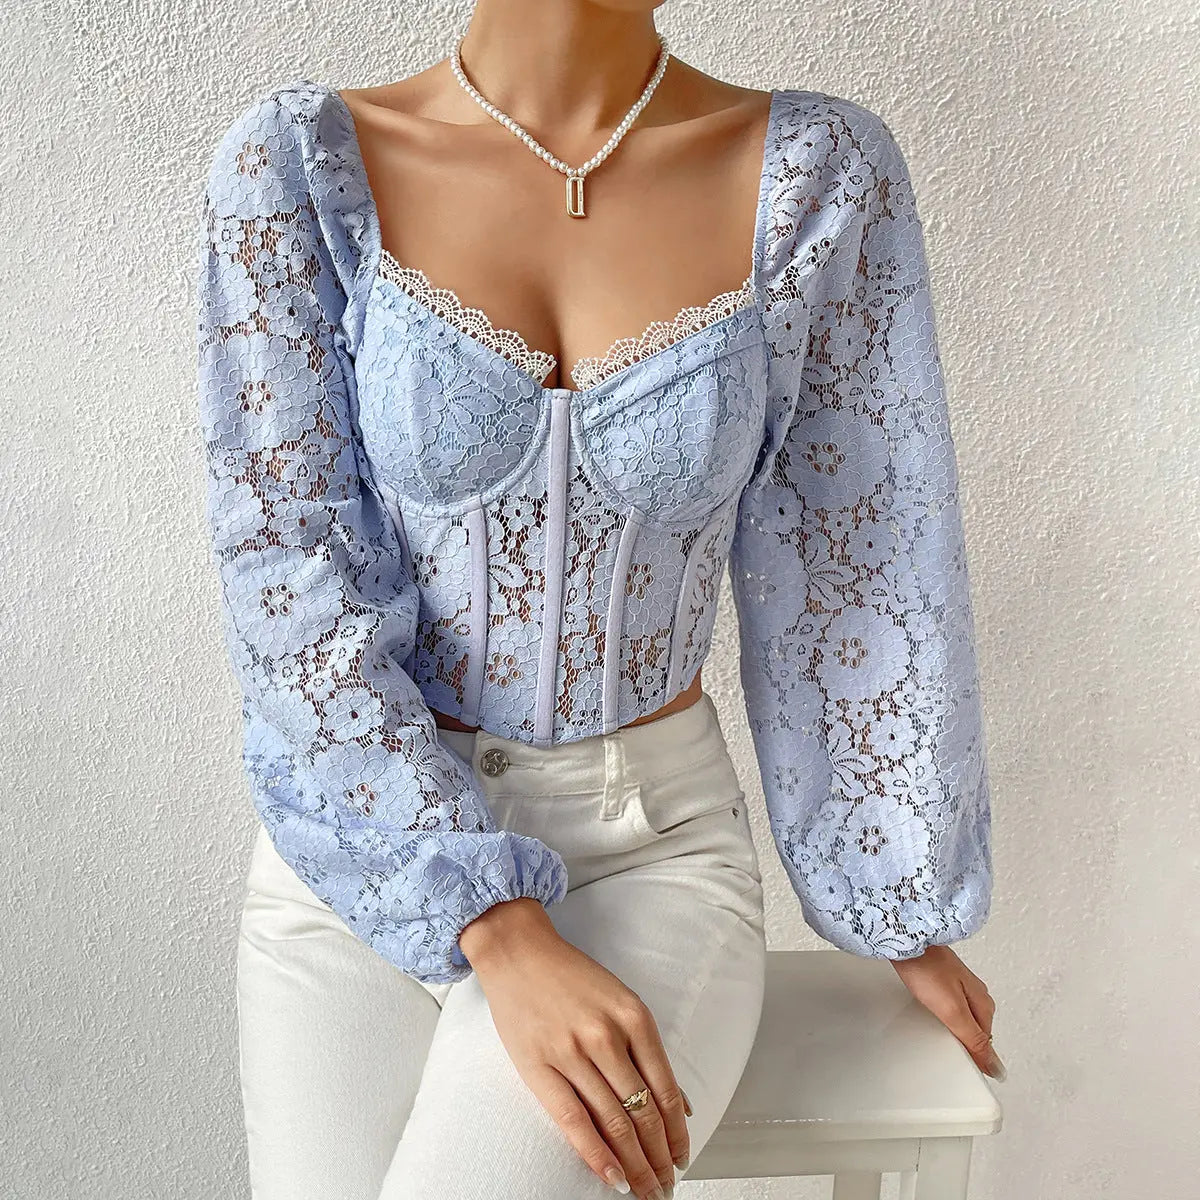 Hollow Cutout See through Long Sleeved Top